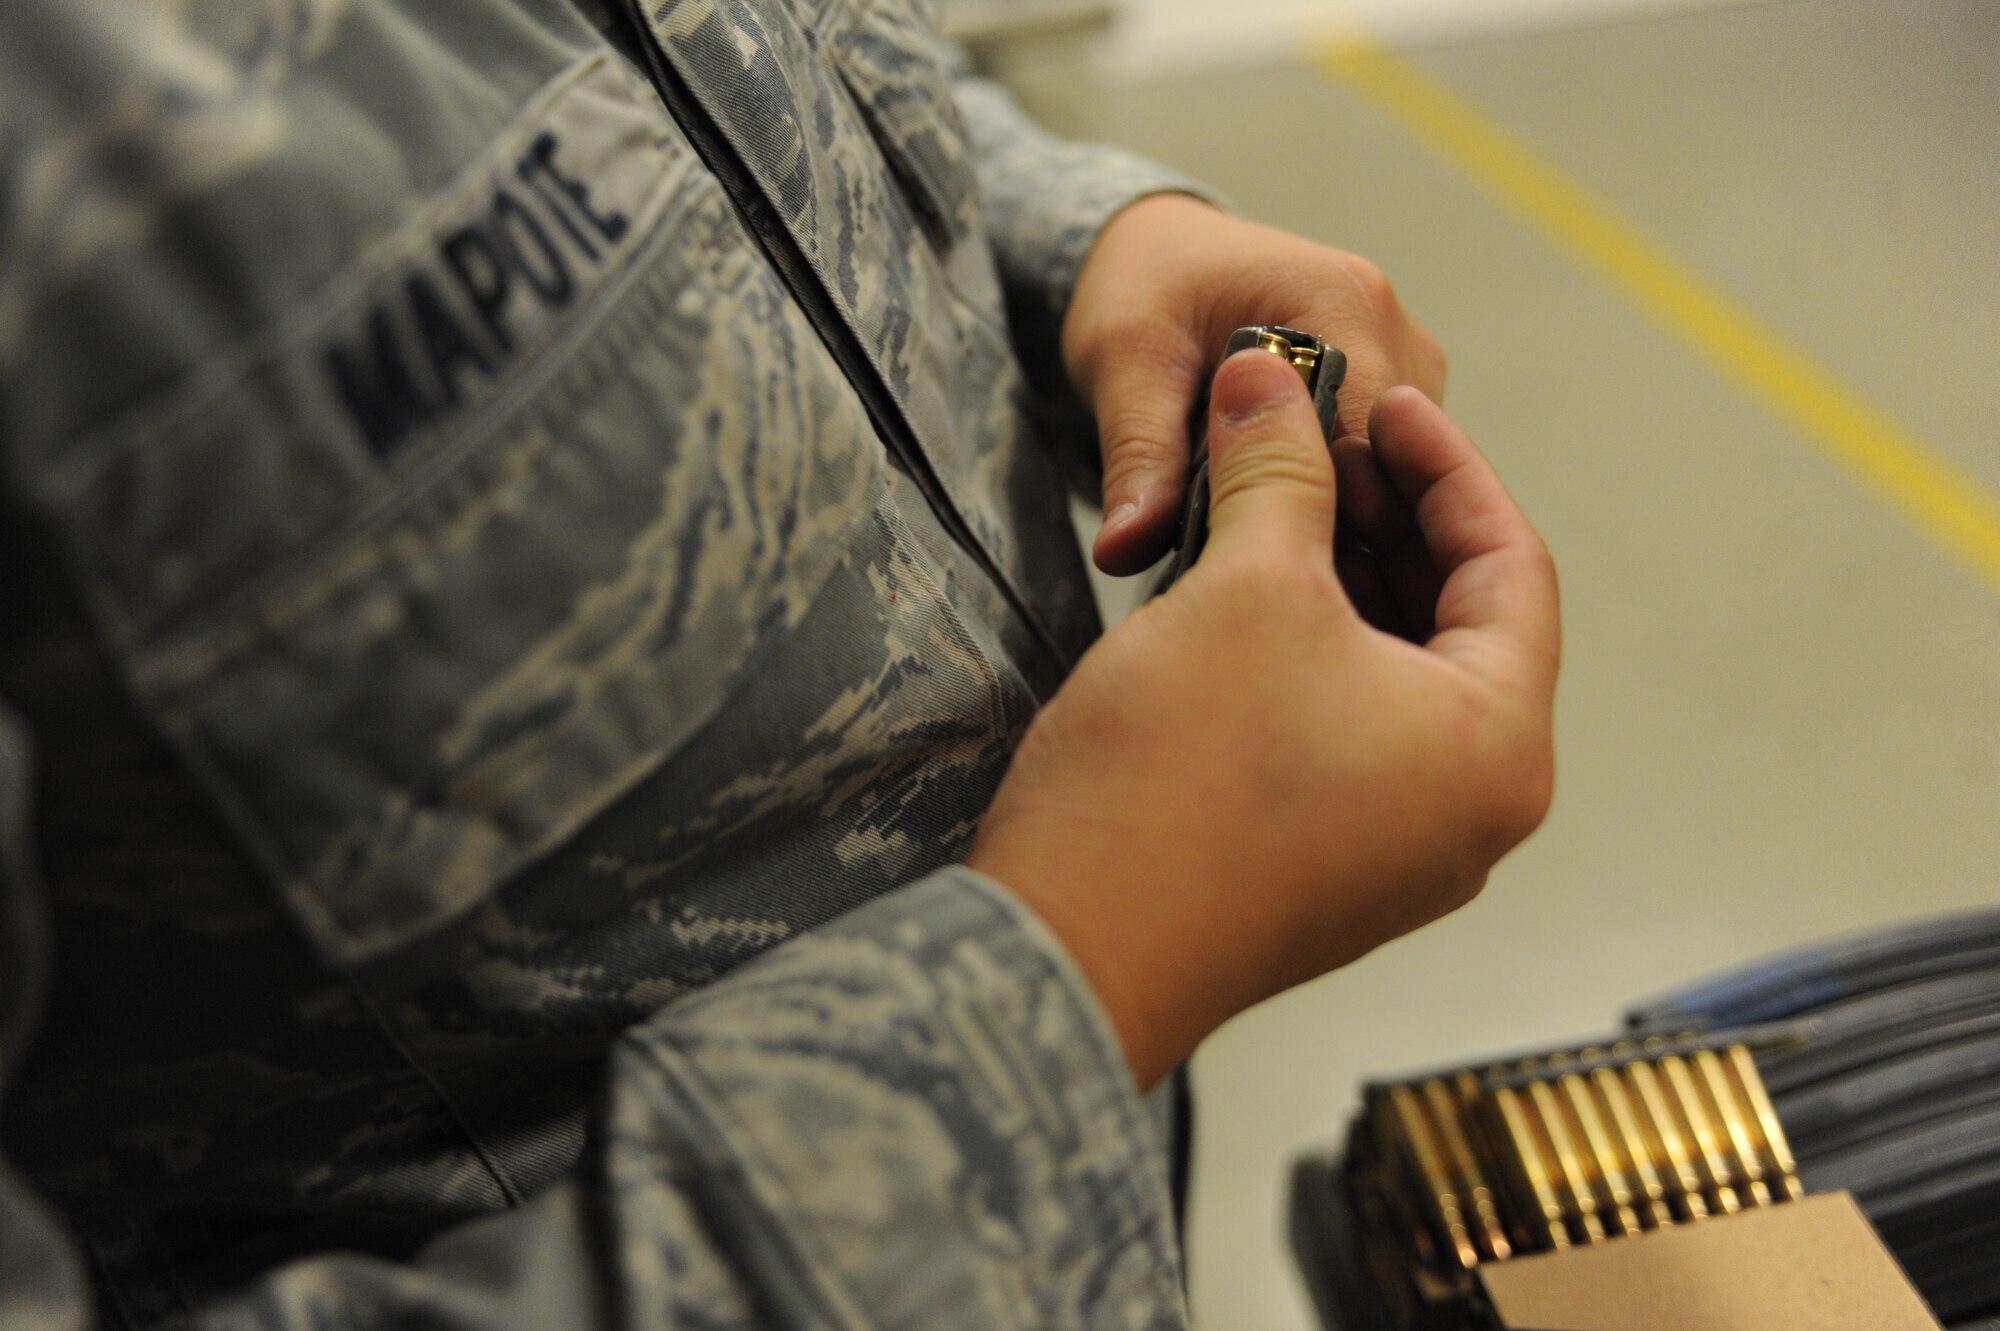 Senior Airman BobbyLee Mapote, 28th Security Forces Squadron response force leader, loads an M9 pistol round into a magazine prior to weapons training at Ellsworth Air Force Base, S.D., Oct. 13, 2015. Ellsworth’s combat arms training includes instruction on different types of ammunitions and how to load magazines. (U.S. Air Force photo by Airman Sadie Colbert/Released)